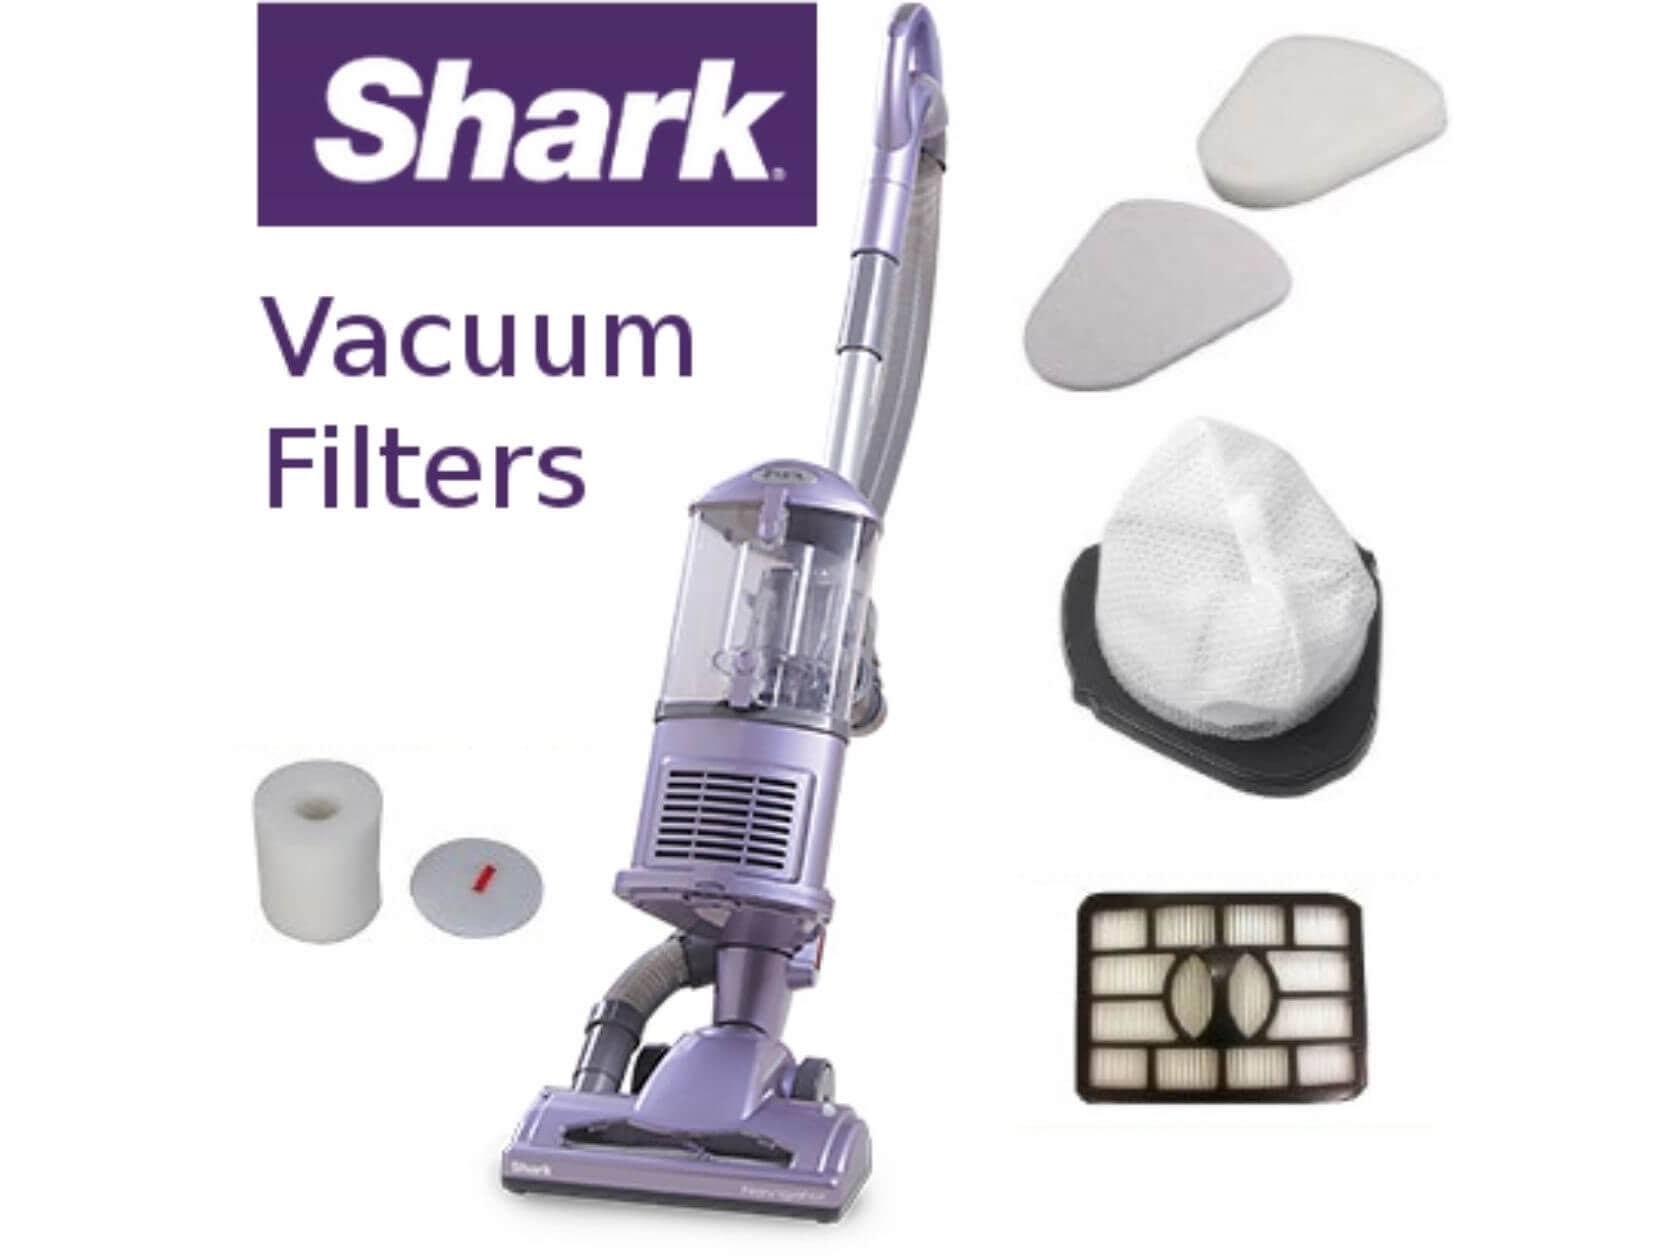 How to Enhance the Life of Your Shark Vacuum Filter?